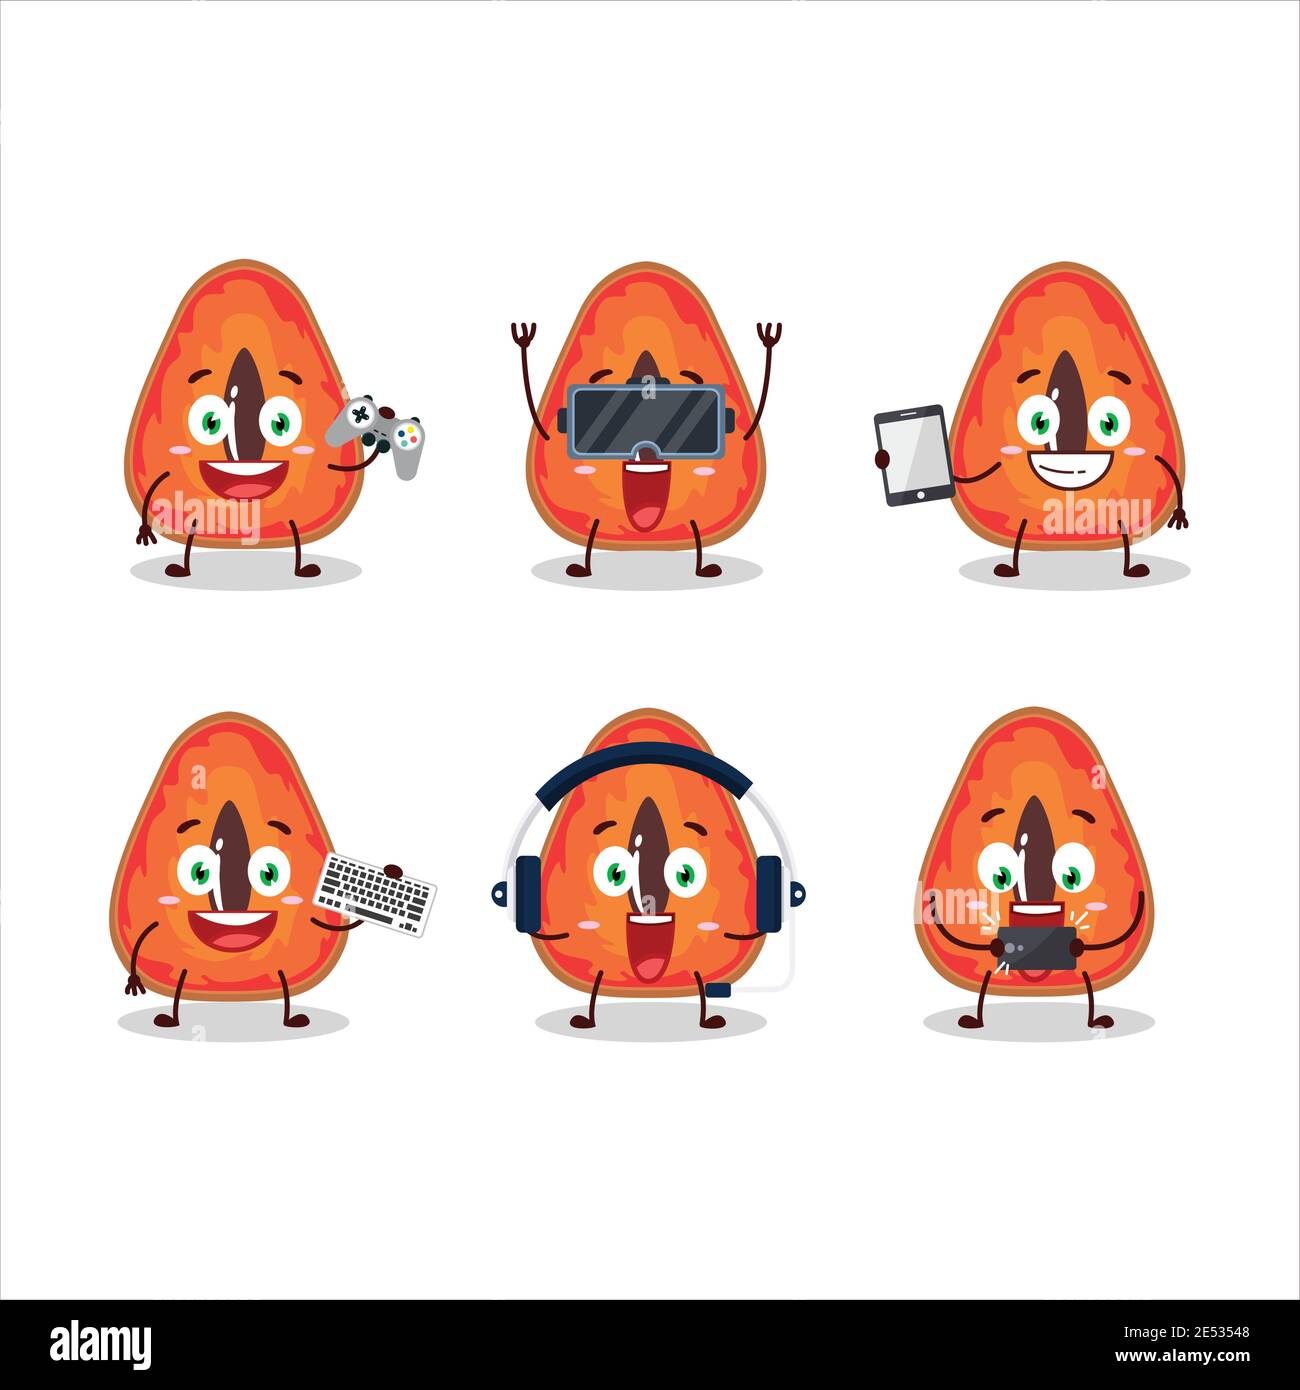 Slice of mamey cartoon character are playing games with various cute emoticons. Vector illustration Stock Vector